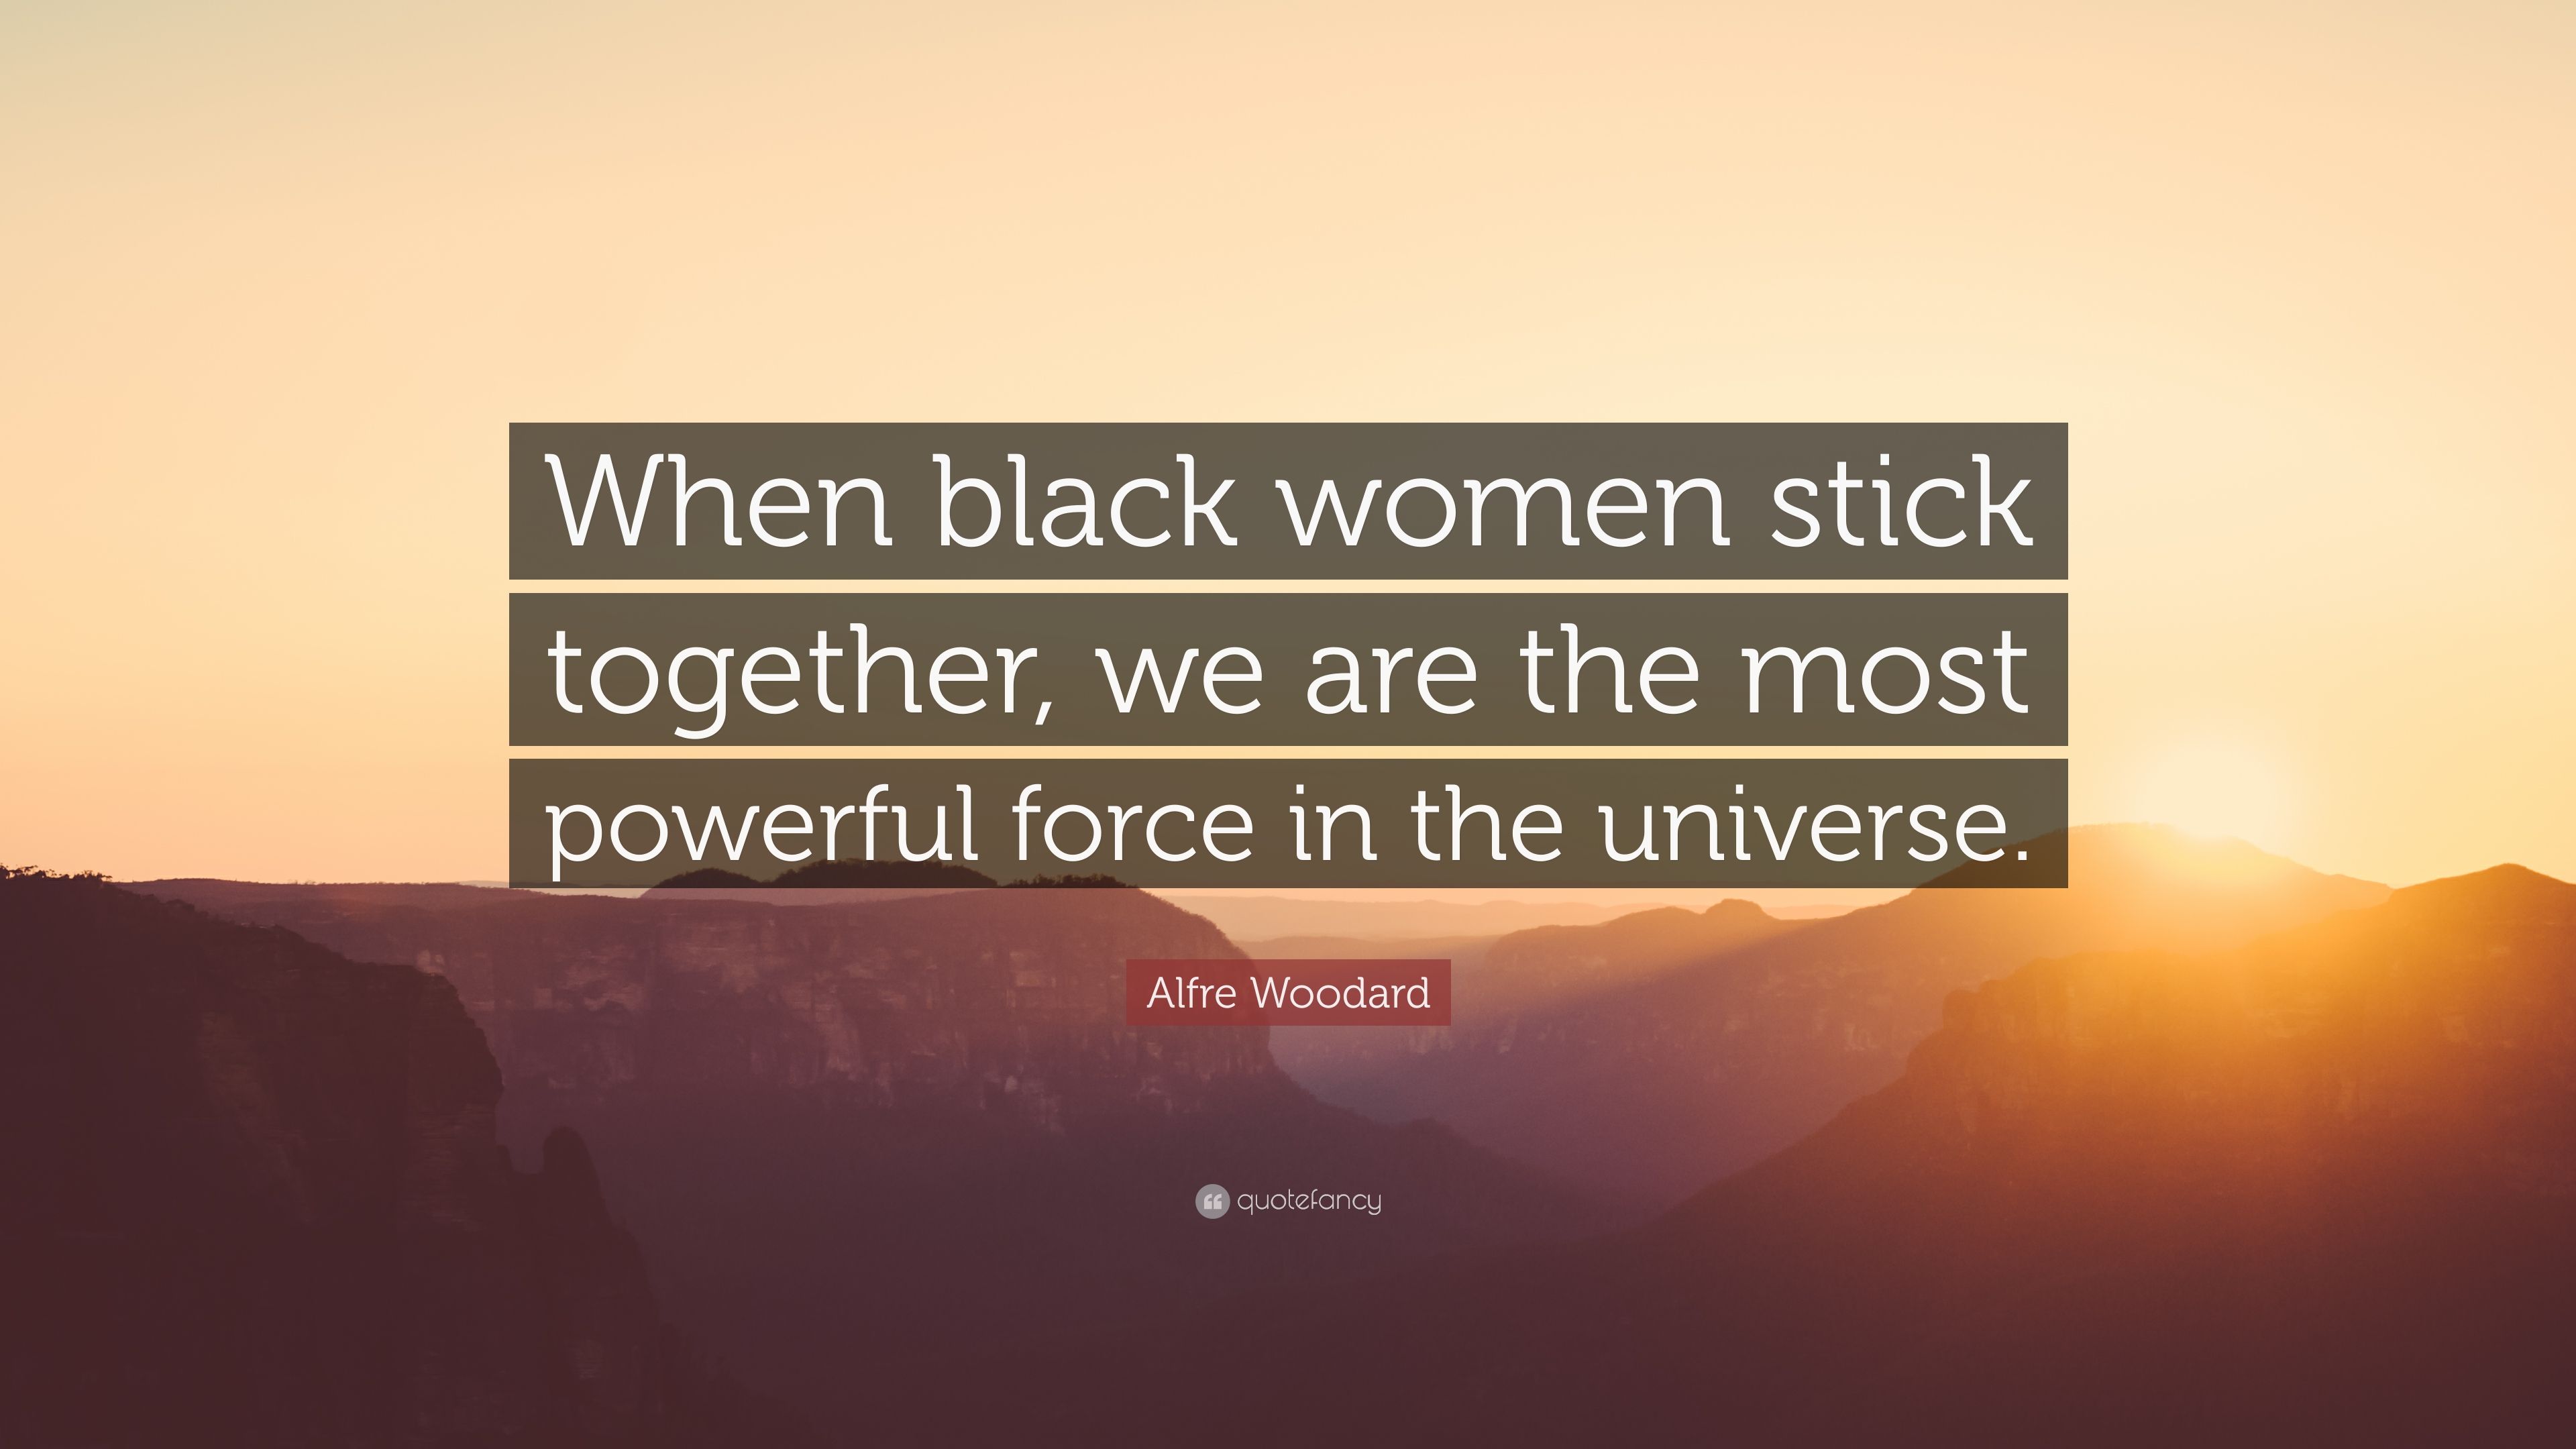 Alfre Woodard Quote: “When black women stick together, we are